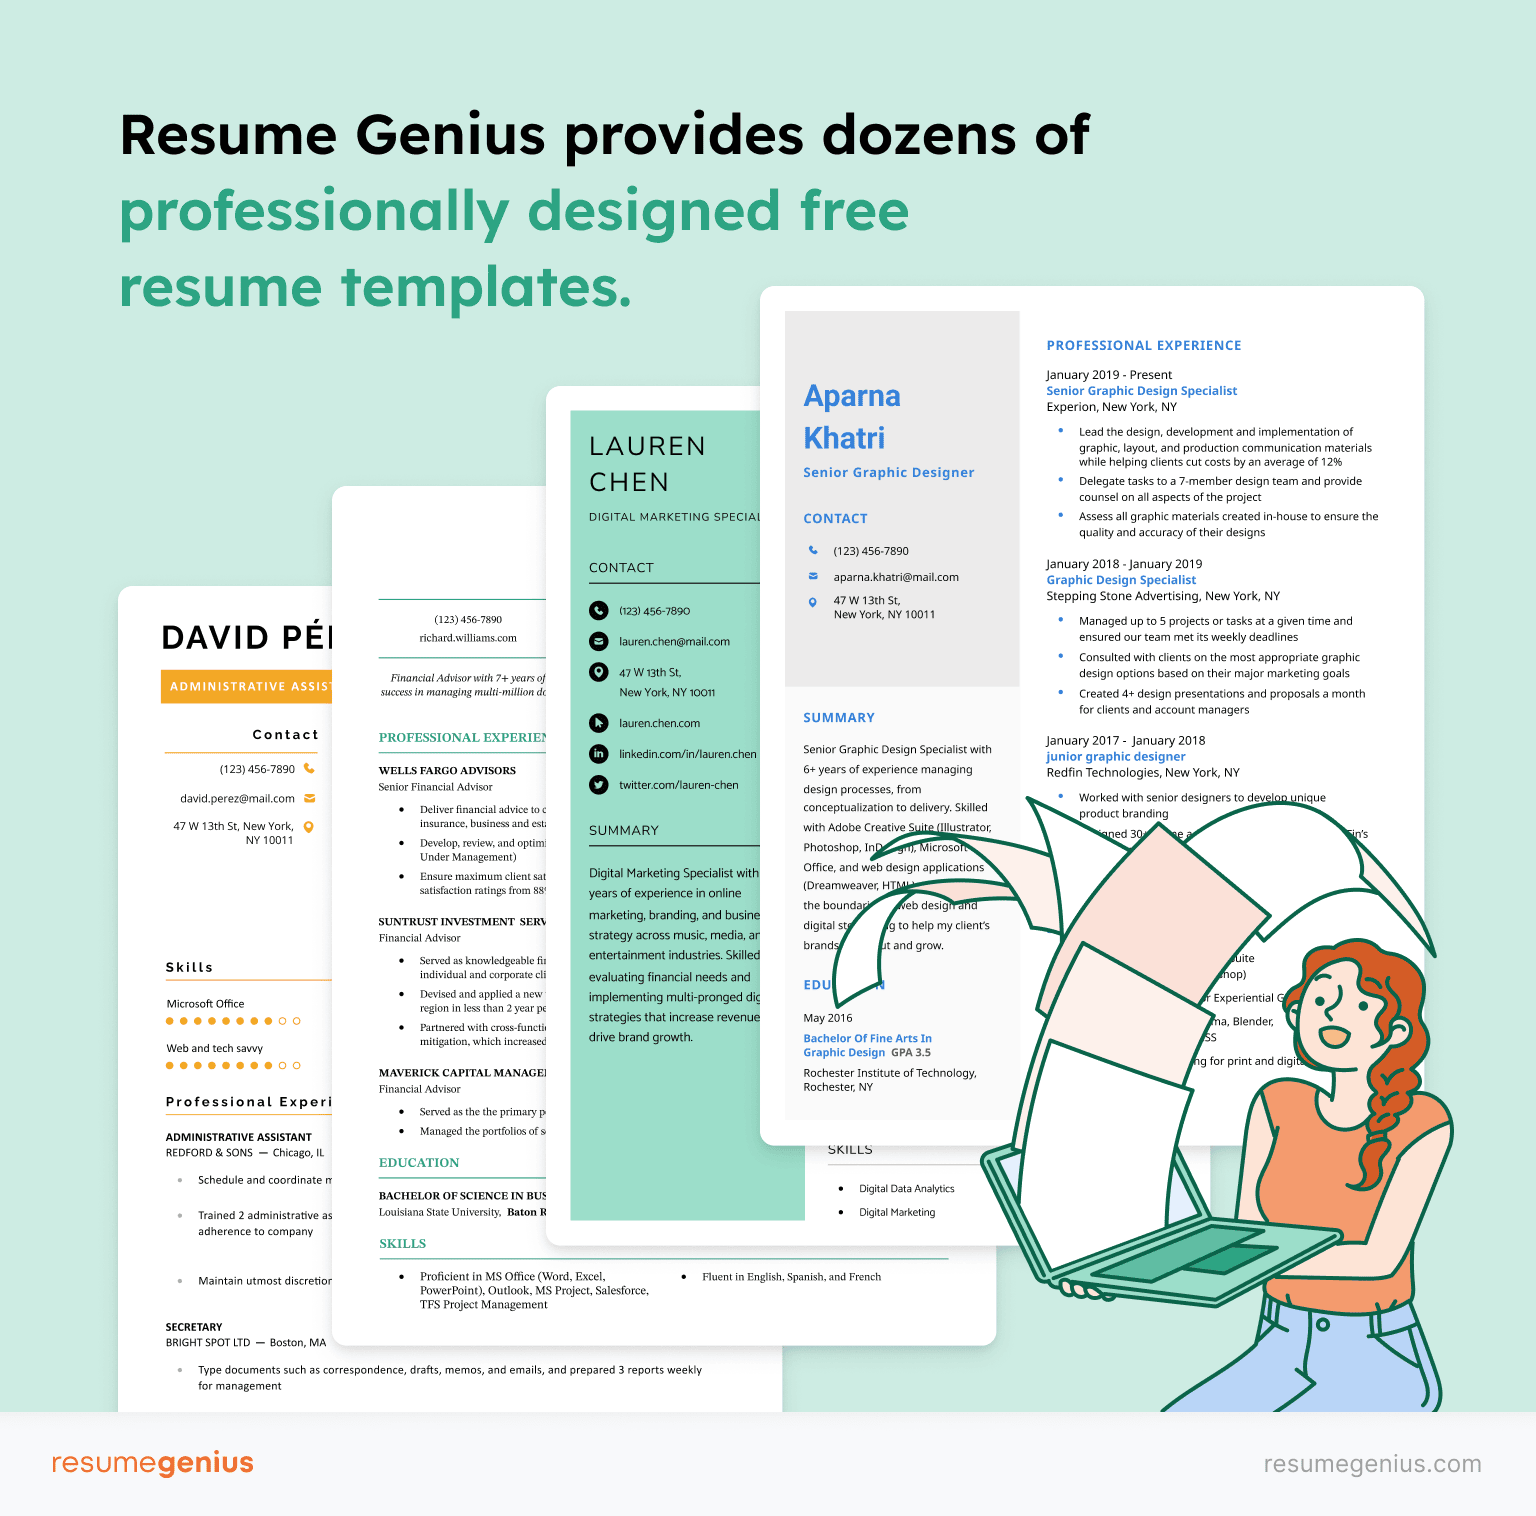 Illustration of a woman choosing one of Resume Genius' many templates. The text above reads: Resume Genius provides dozens of professional designed free resume templates.